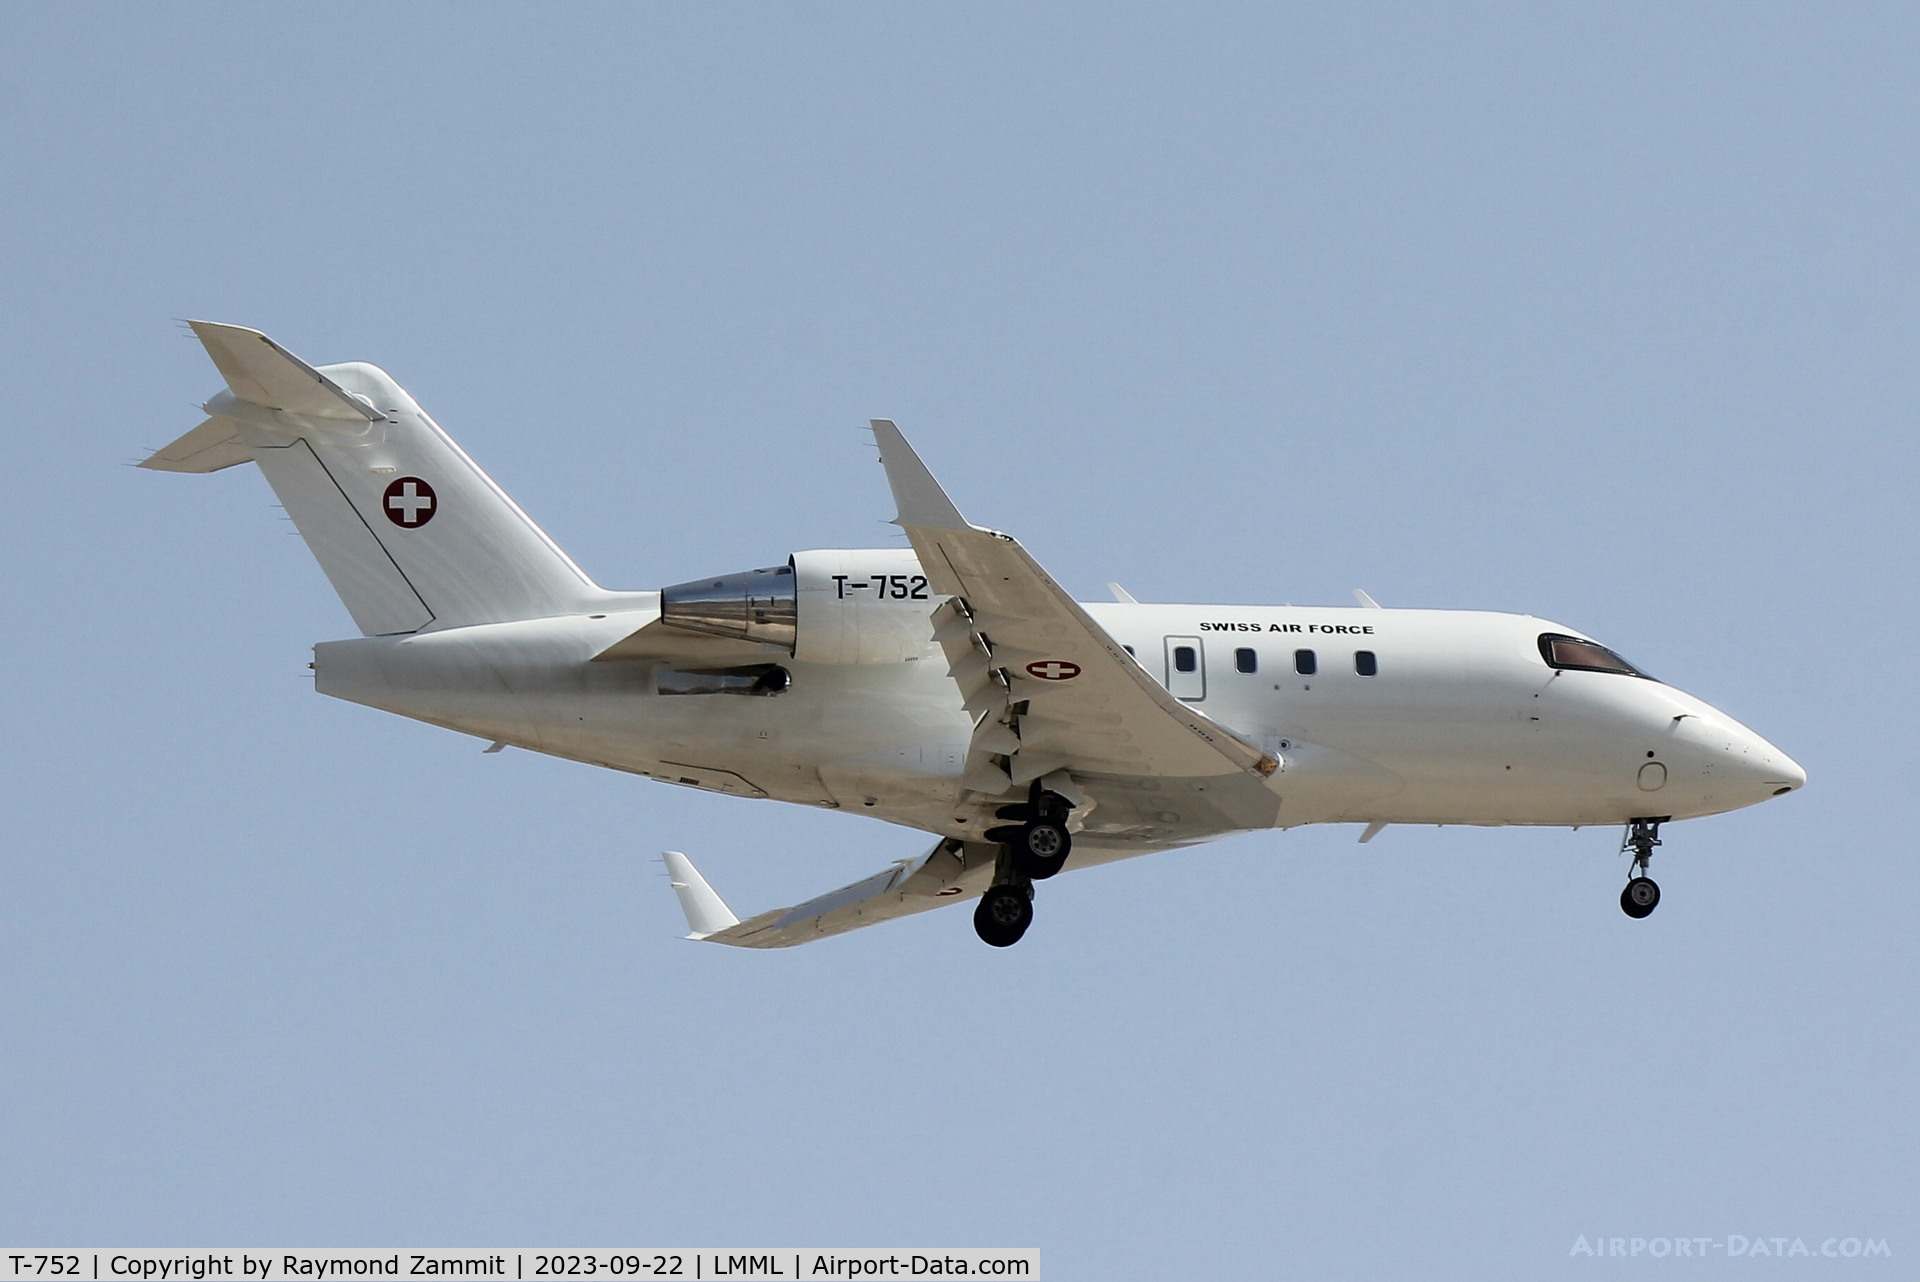 T-752, 2002 Bombardier Challenger 604 (CL-600-2B16) C/N 5540, Bombardier Challenger 604 T-752 Swiss Air Force